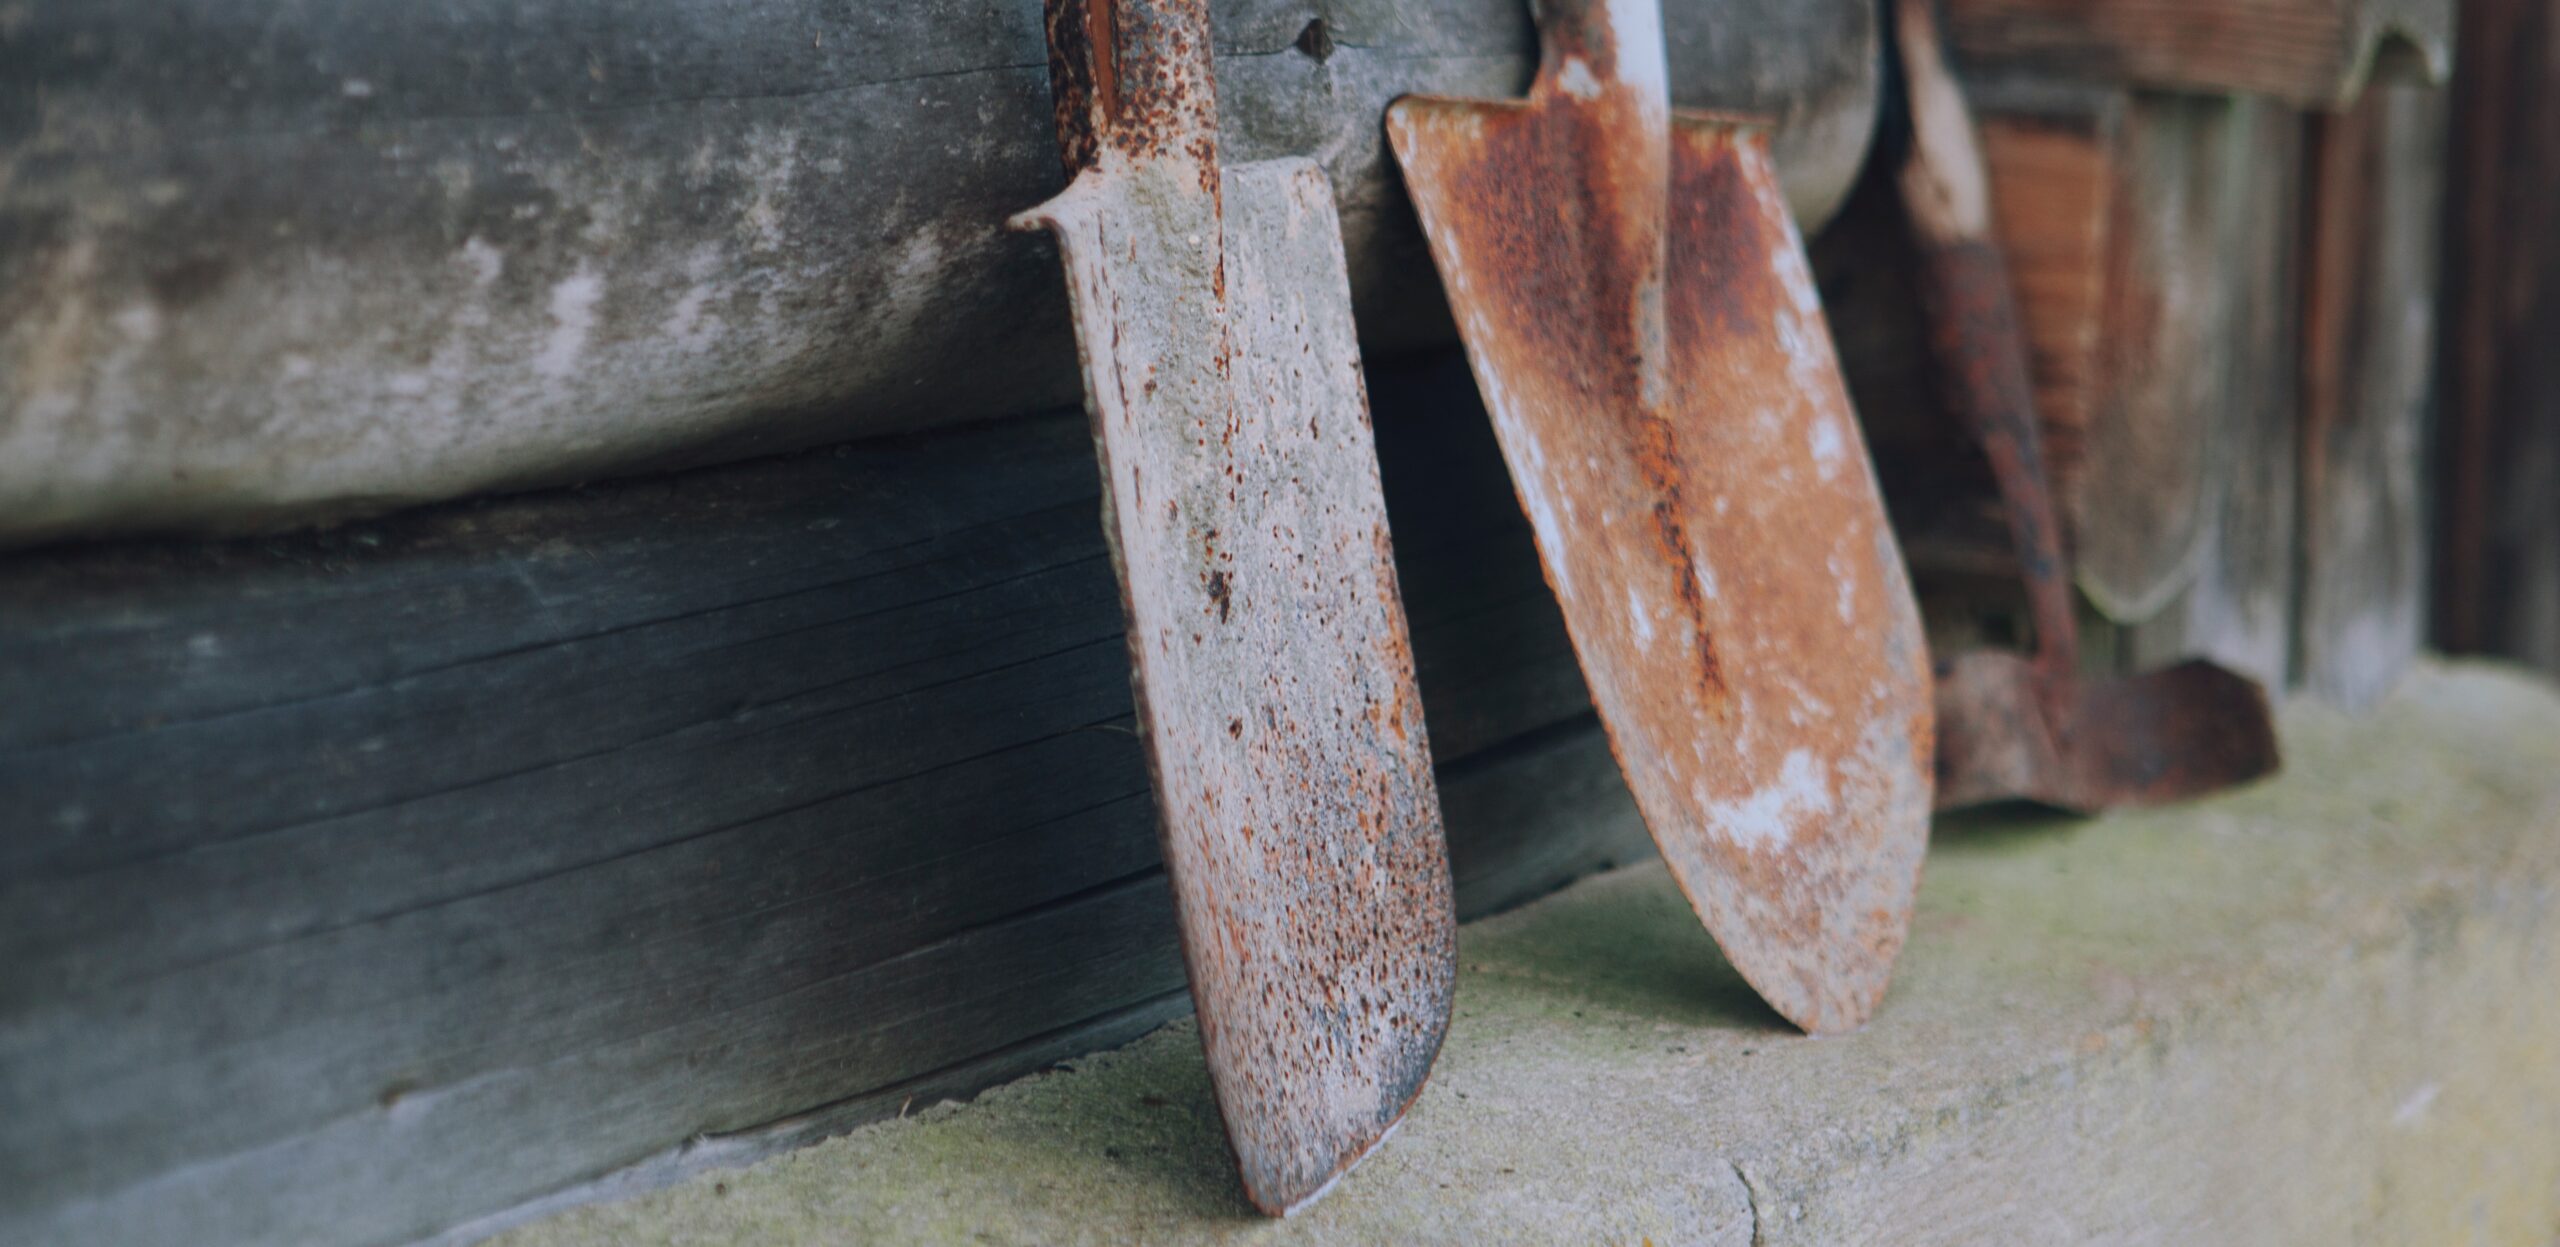 5 Simple Ways to Maintain Your Lawn Tools